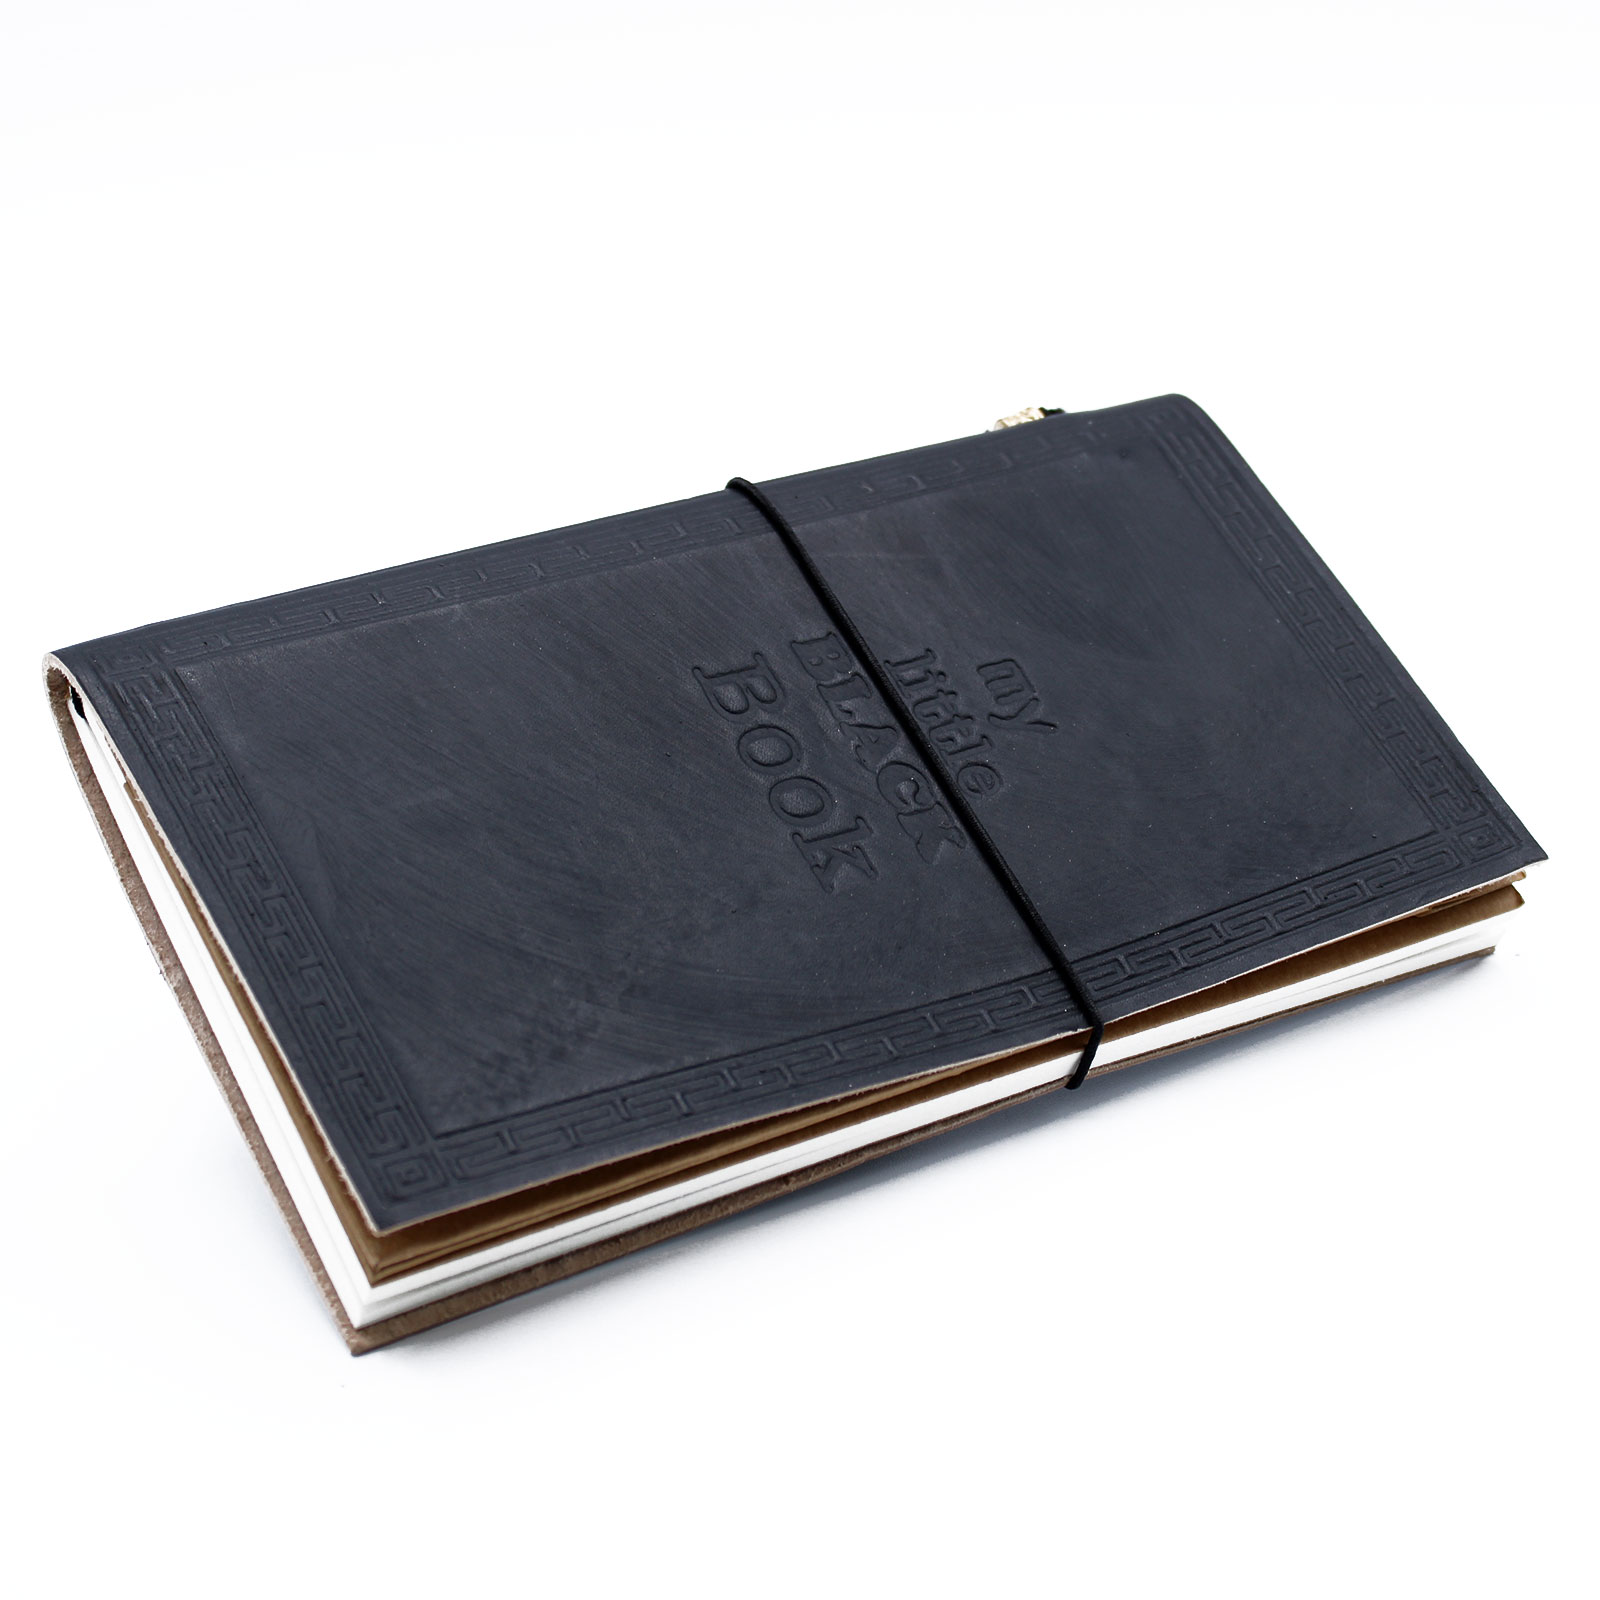 Handmade Leather Journal - My Little Black Book - Black (80 pages) - MSJ-09